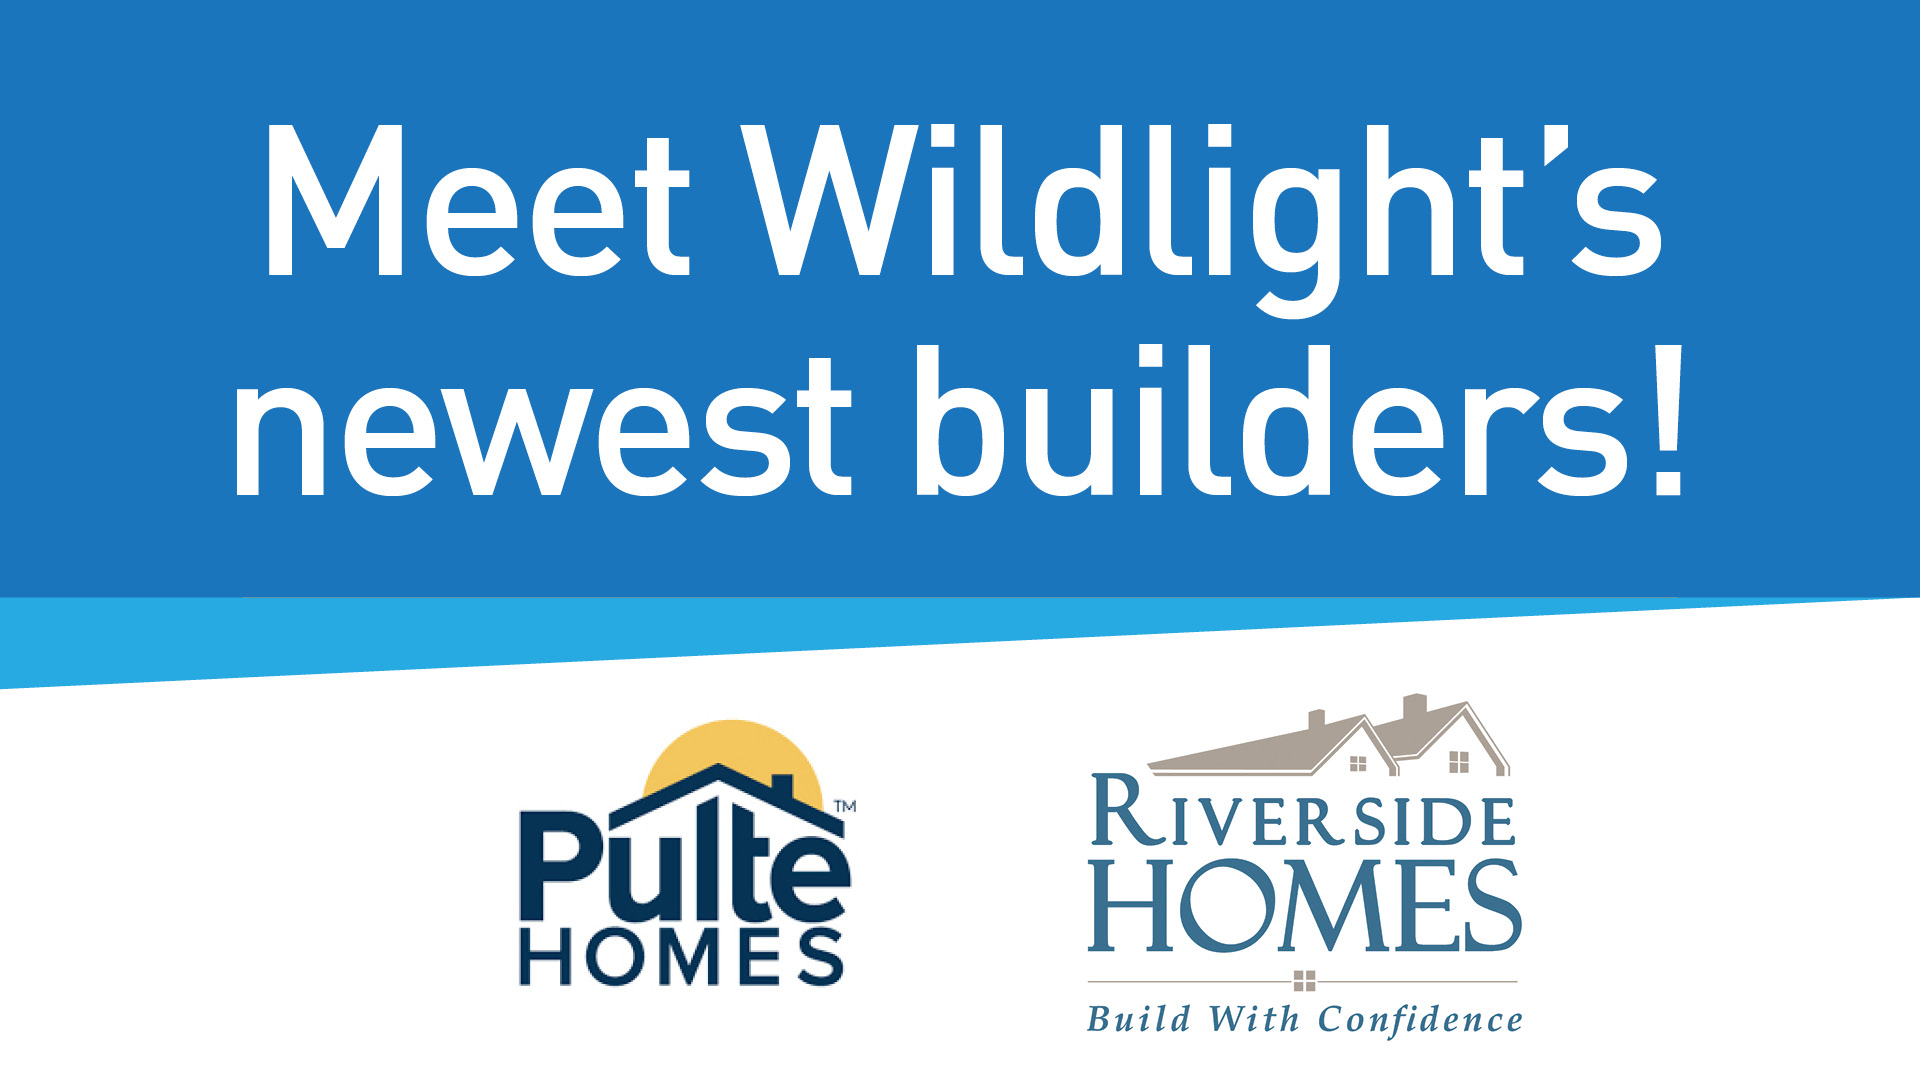 Meet Wildlight's newest builders! Pulte Homes and Riverside Homes logos.